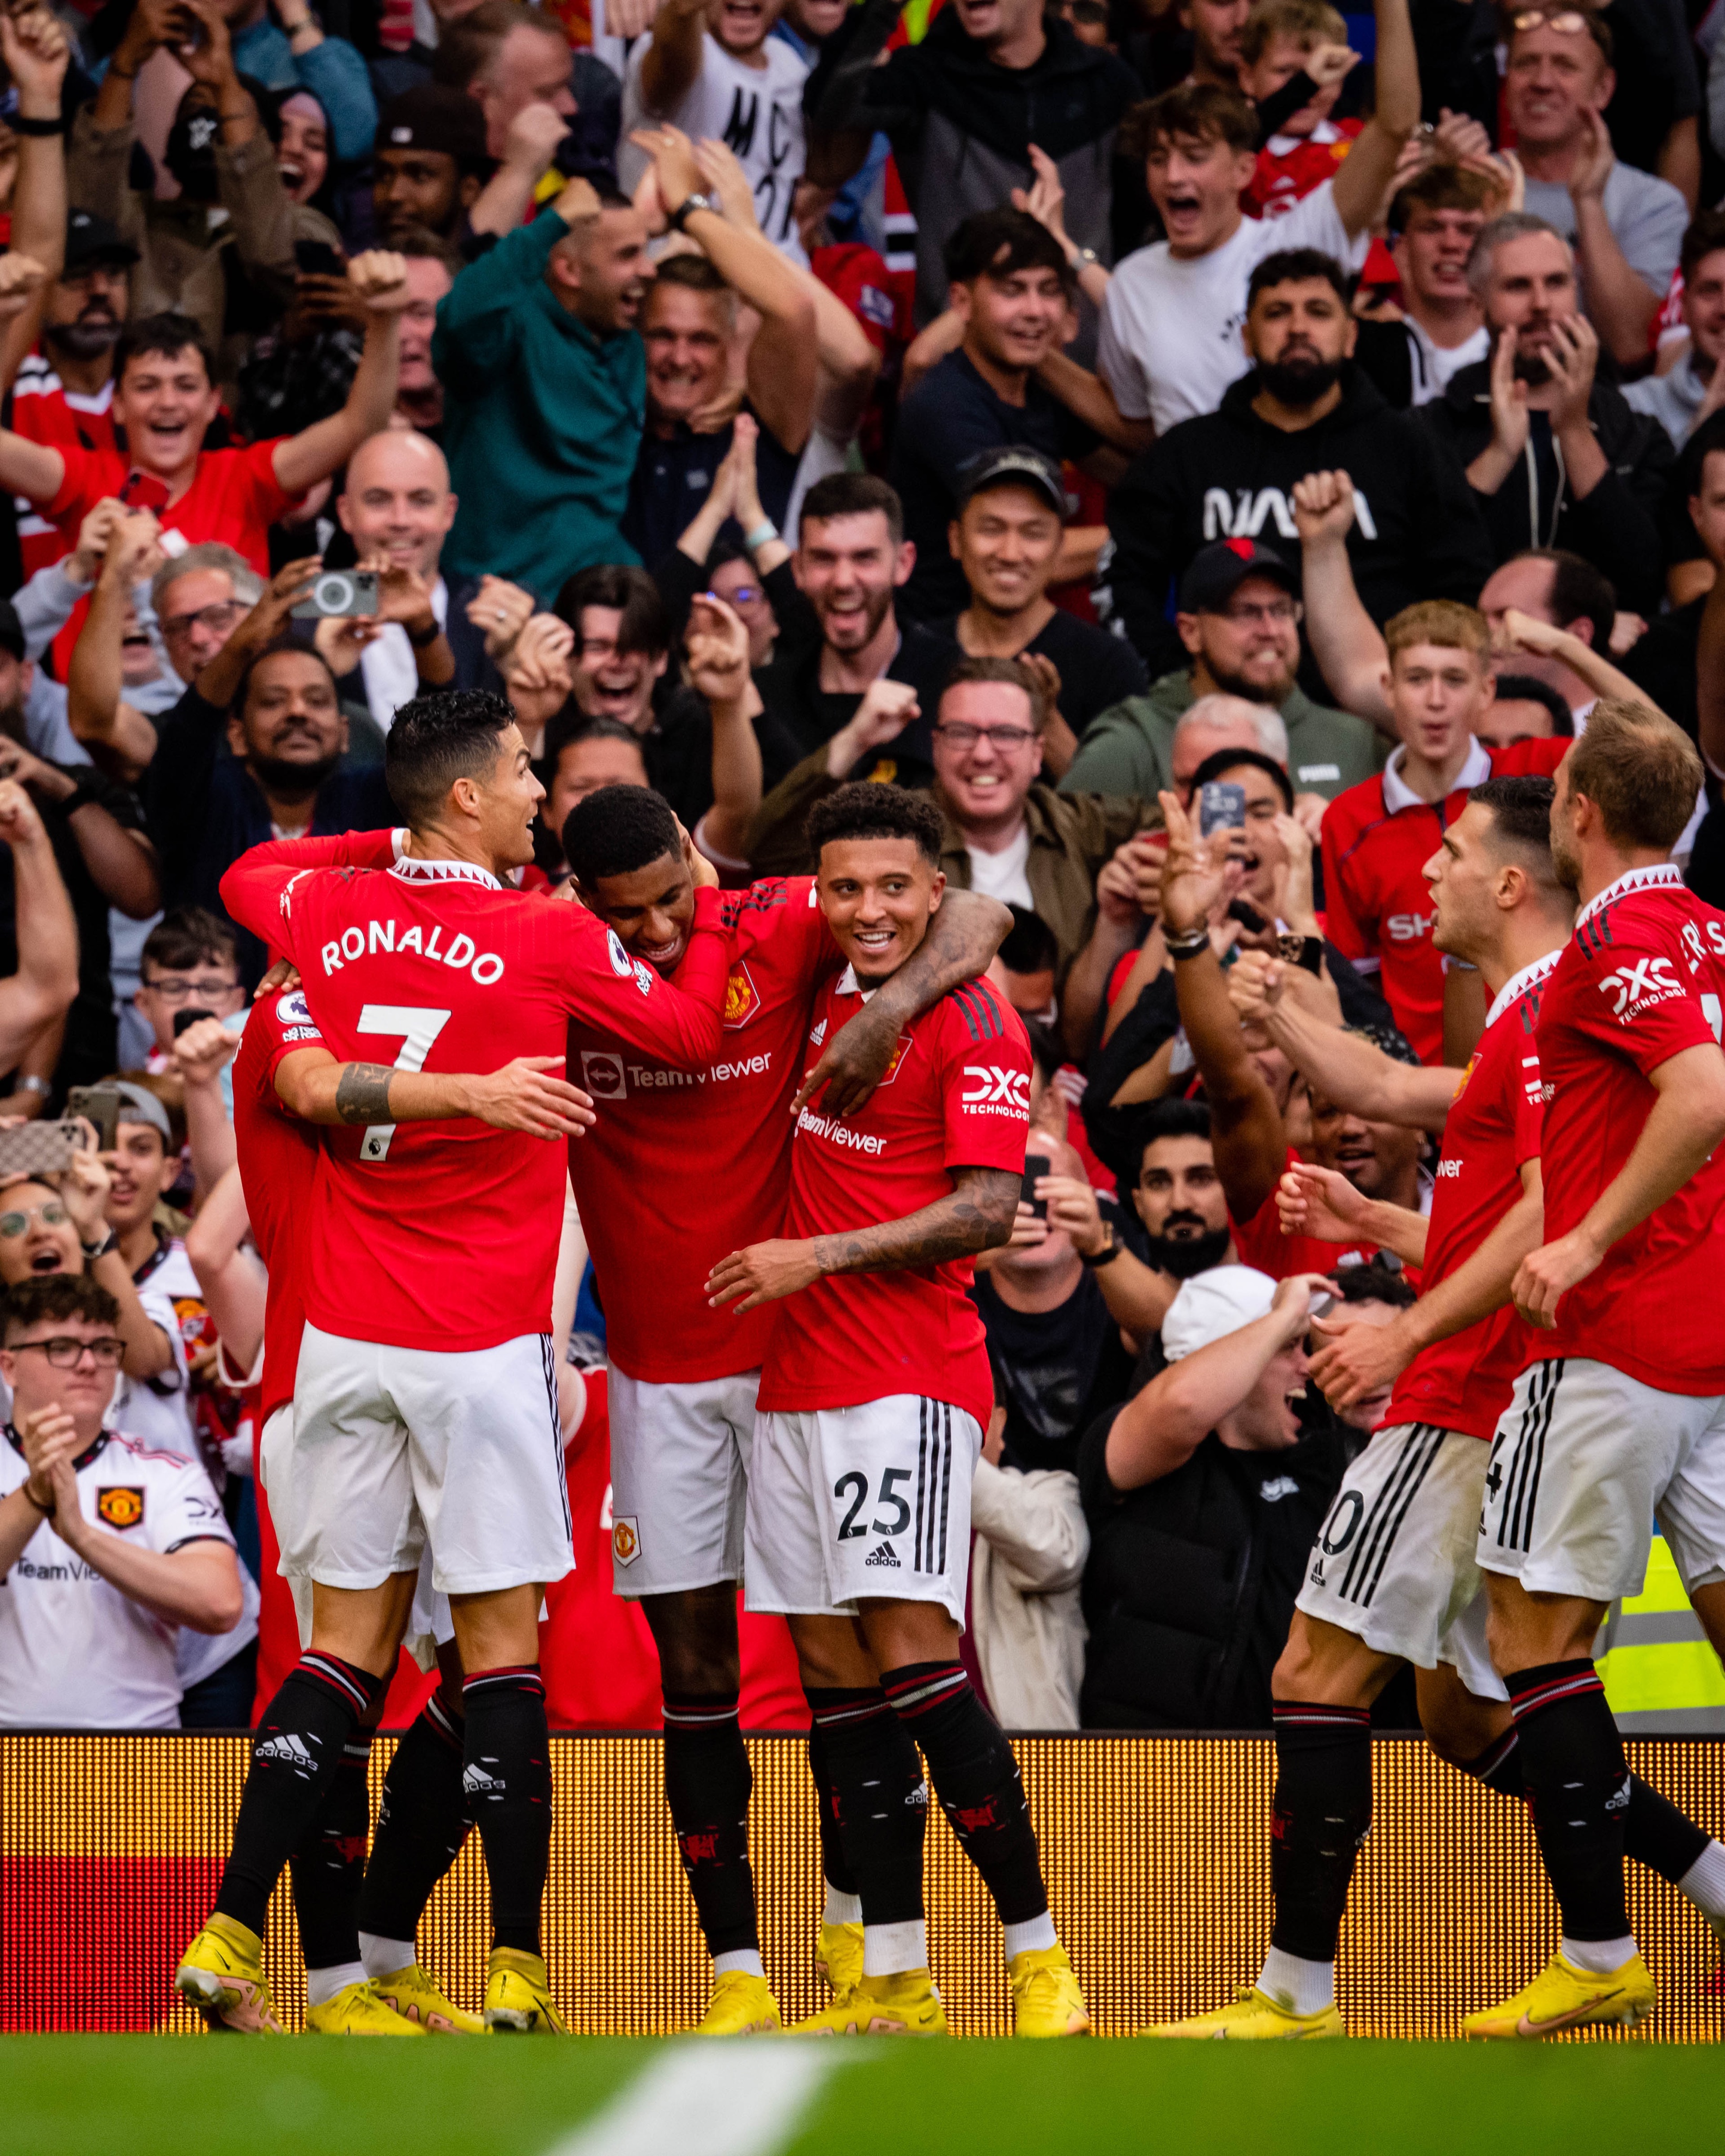 The Reds celebrate together during United's 3-1 win over Arsenal.